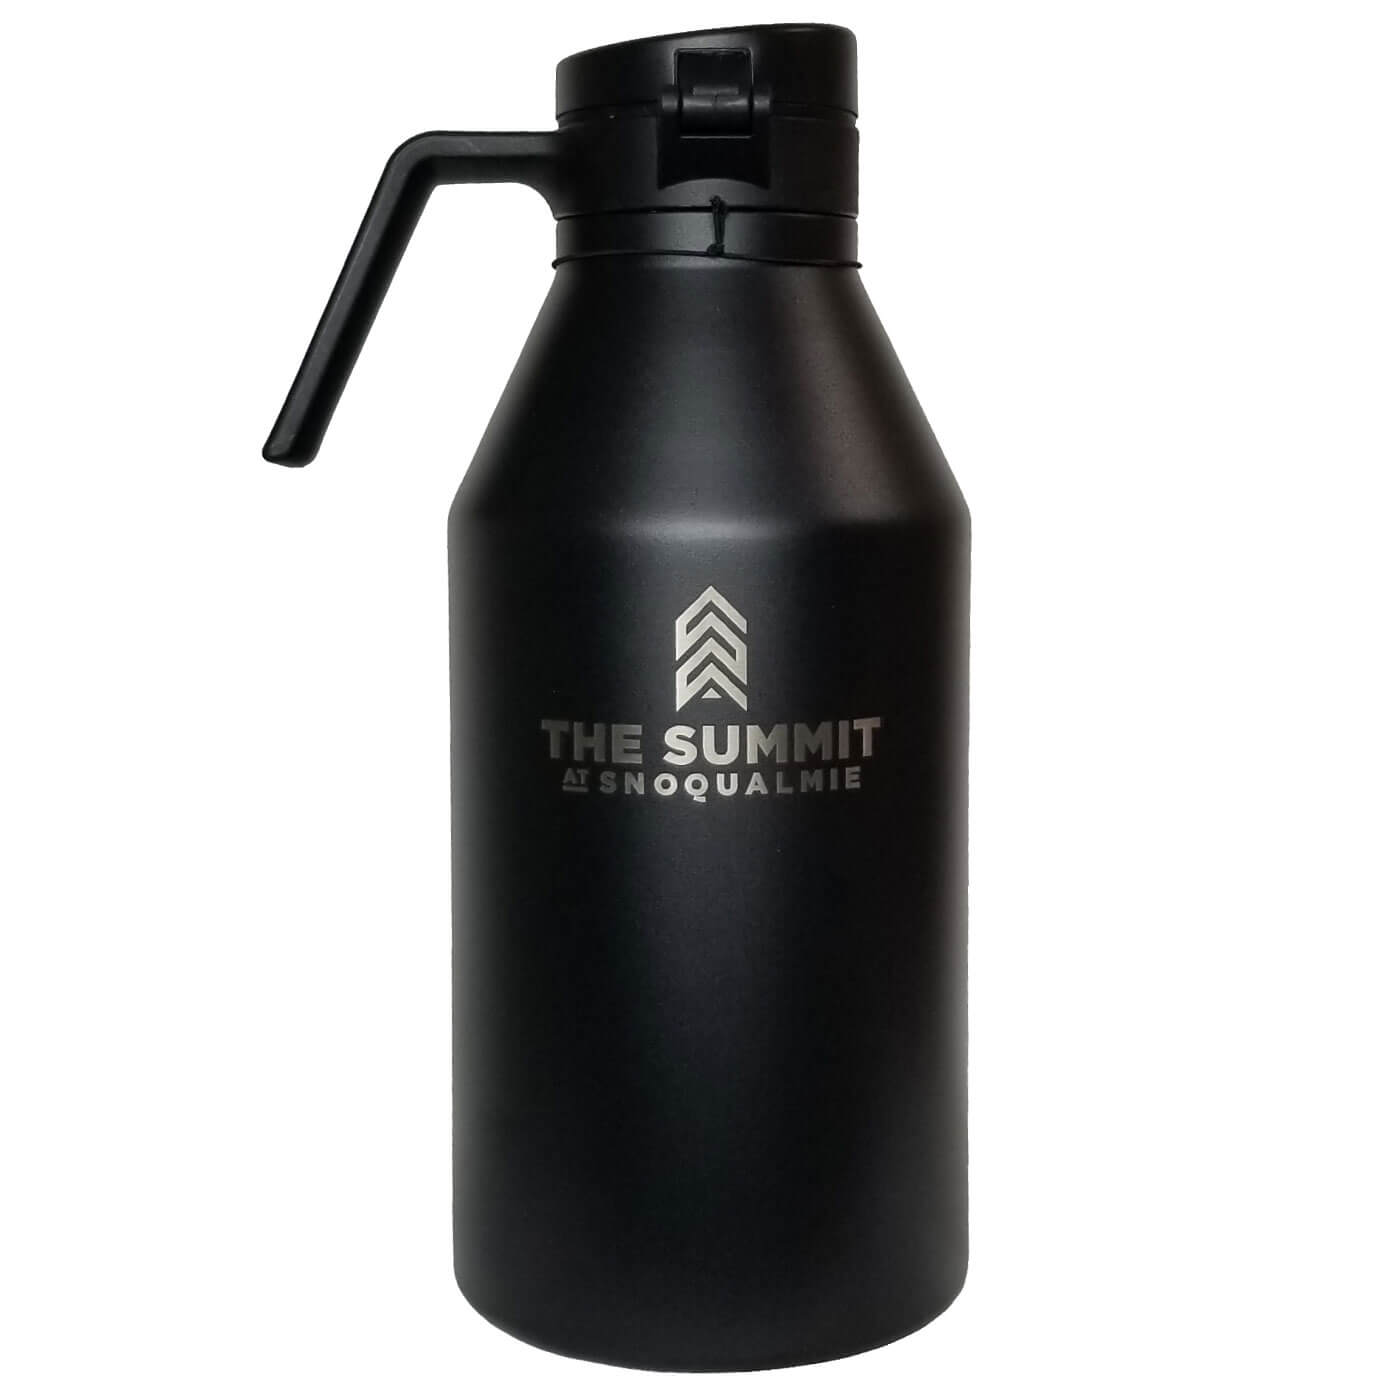 The Summit at Snoqualmie Growler 64oz Vacuum Insulated Bottle with Locking Lid 